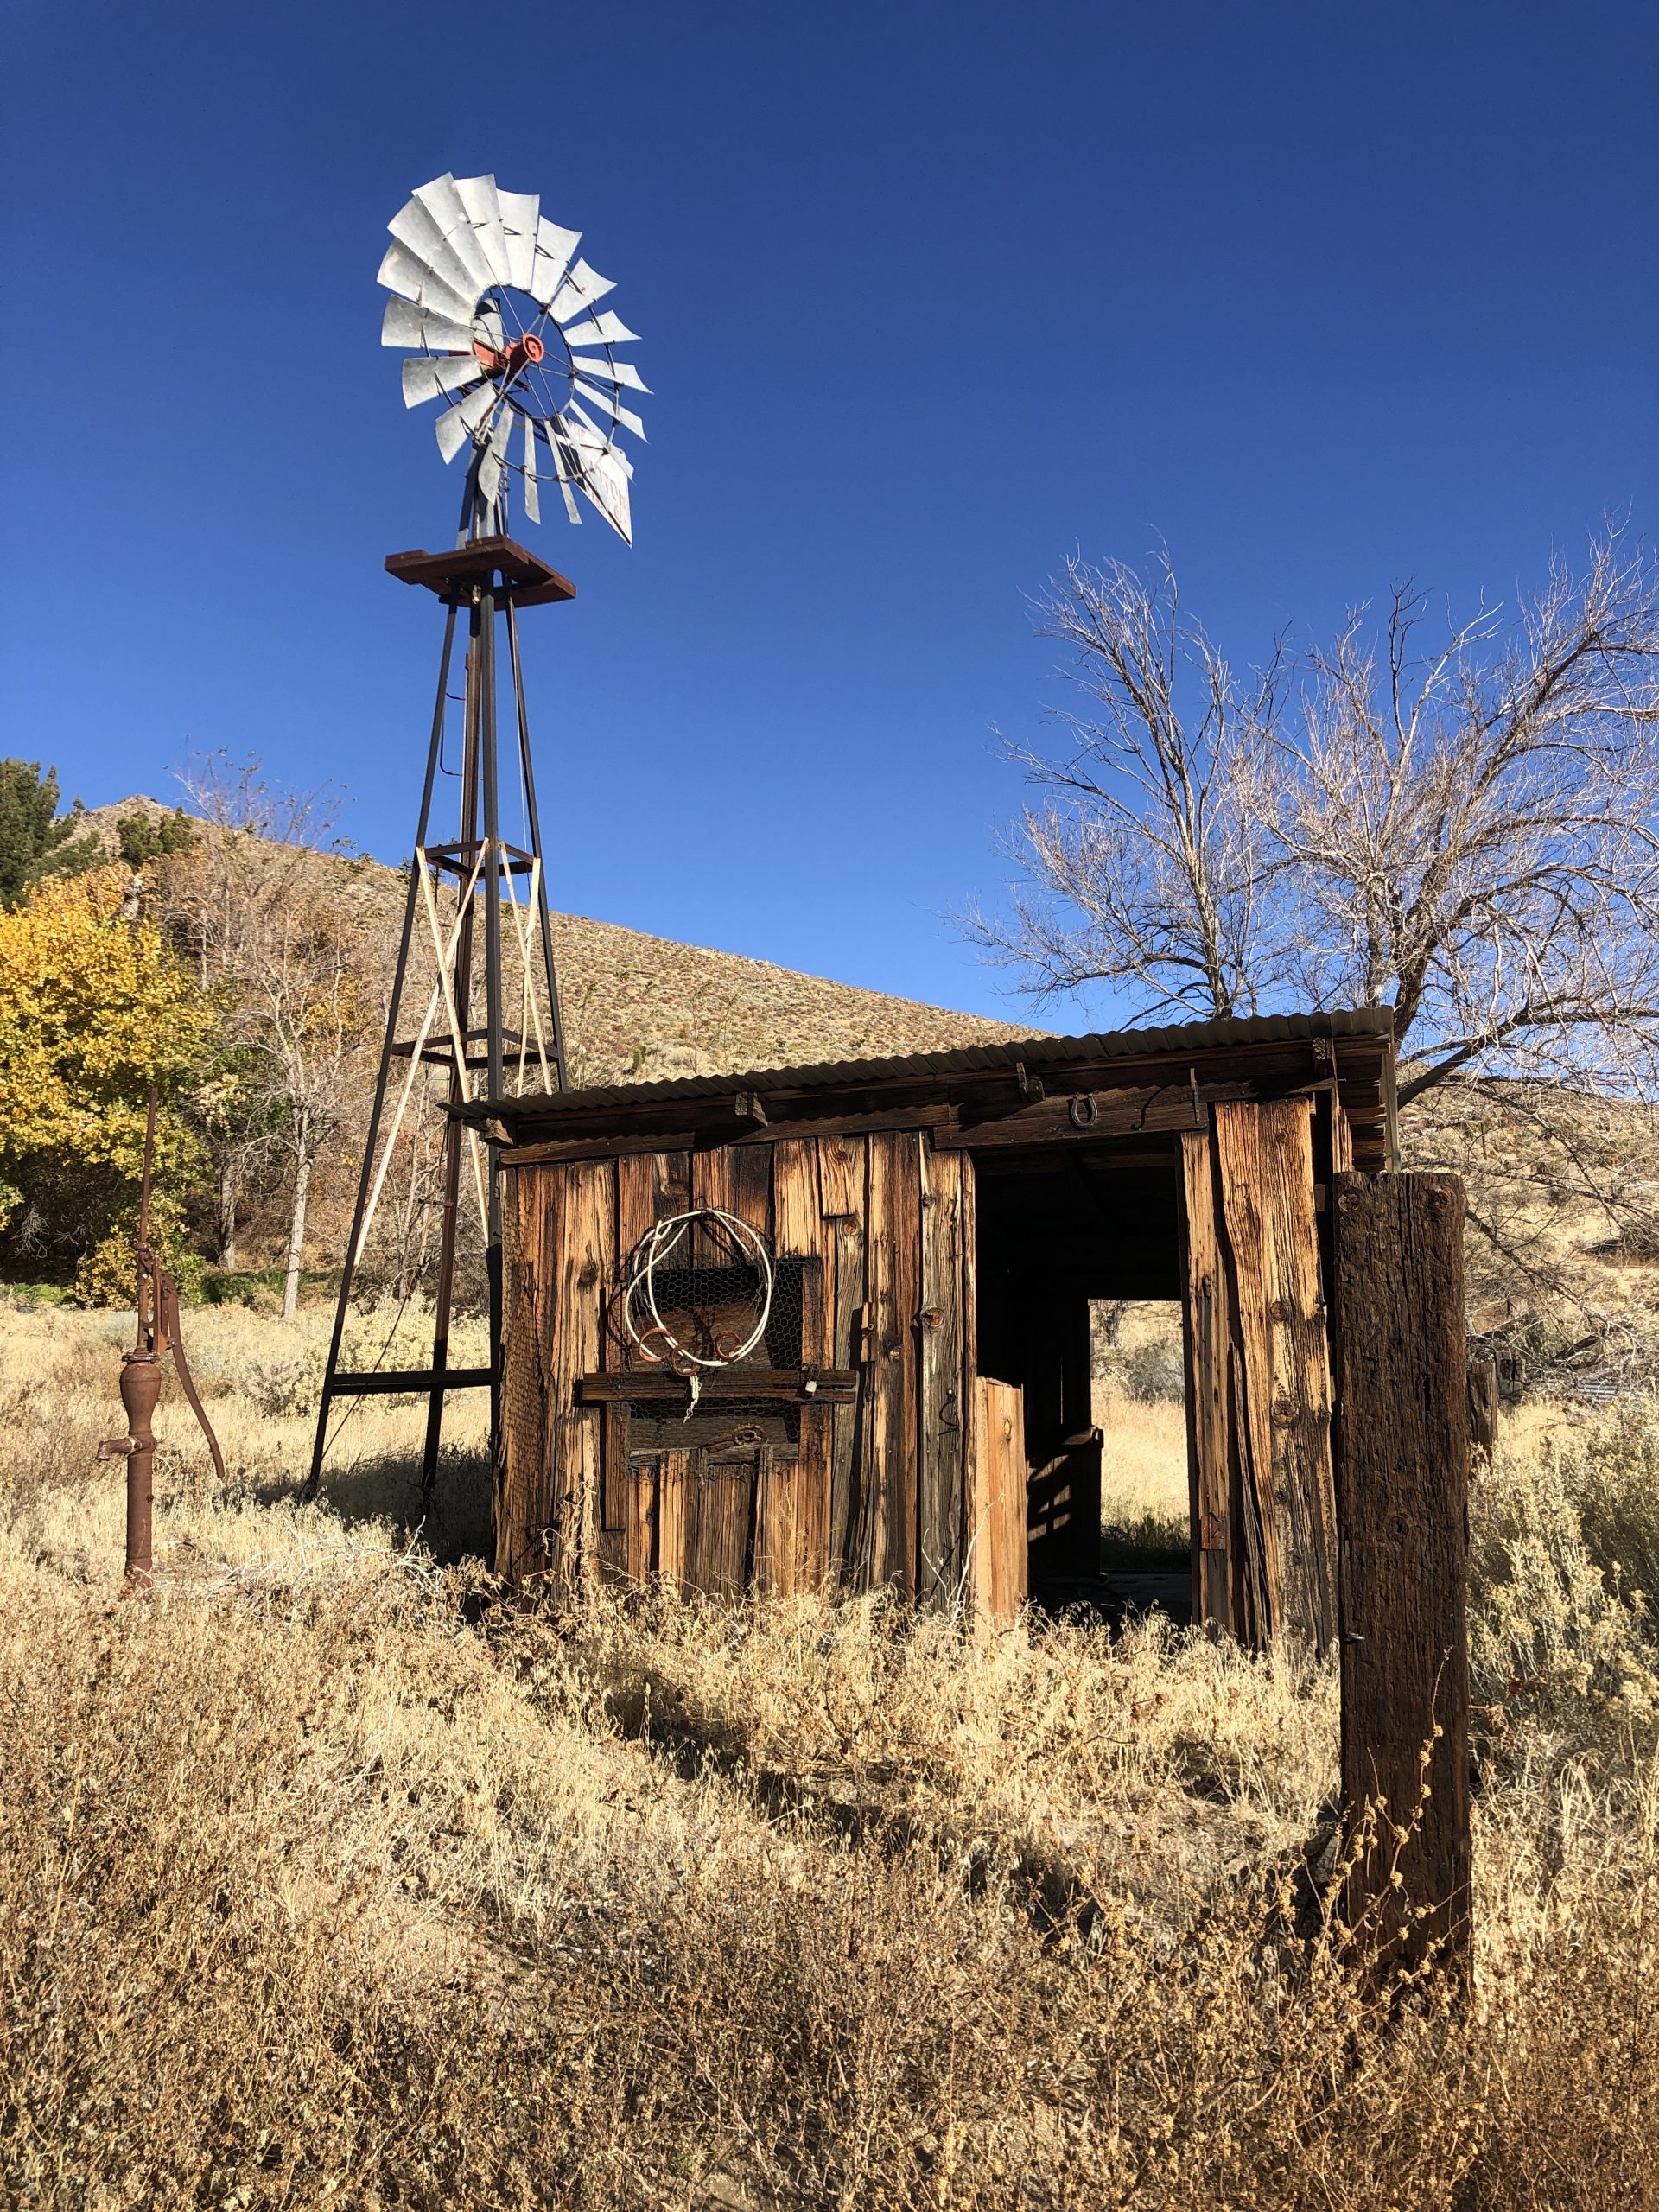 photo showing old ranch building and a windmill